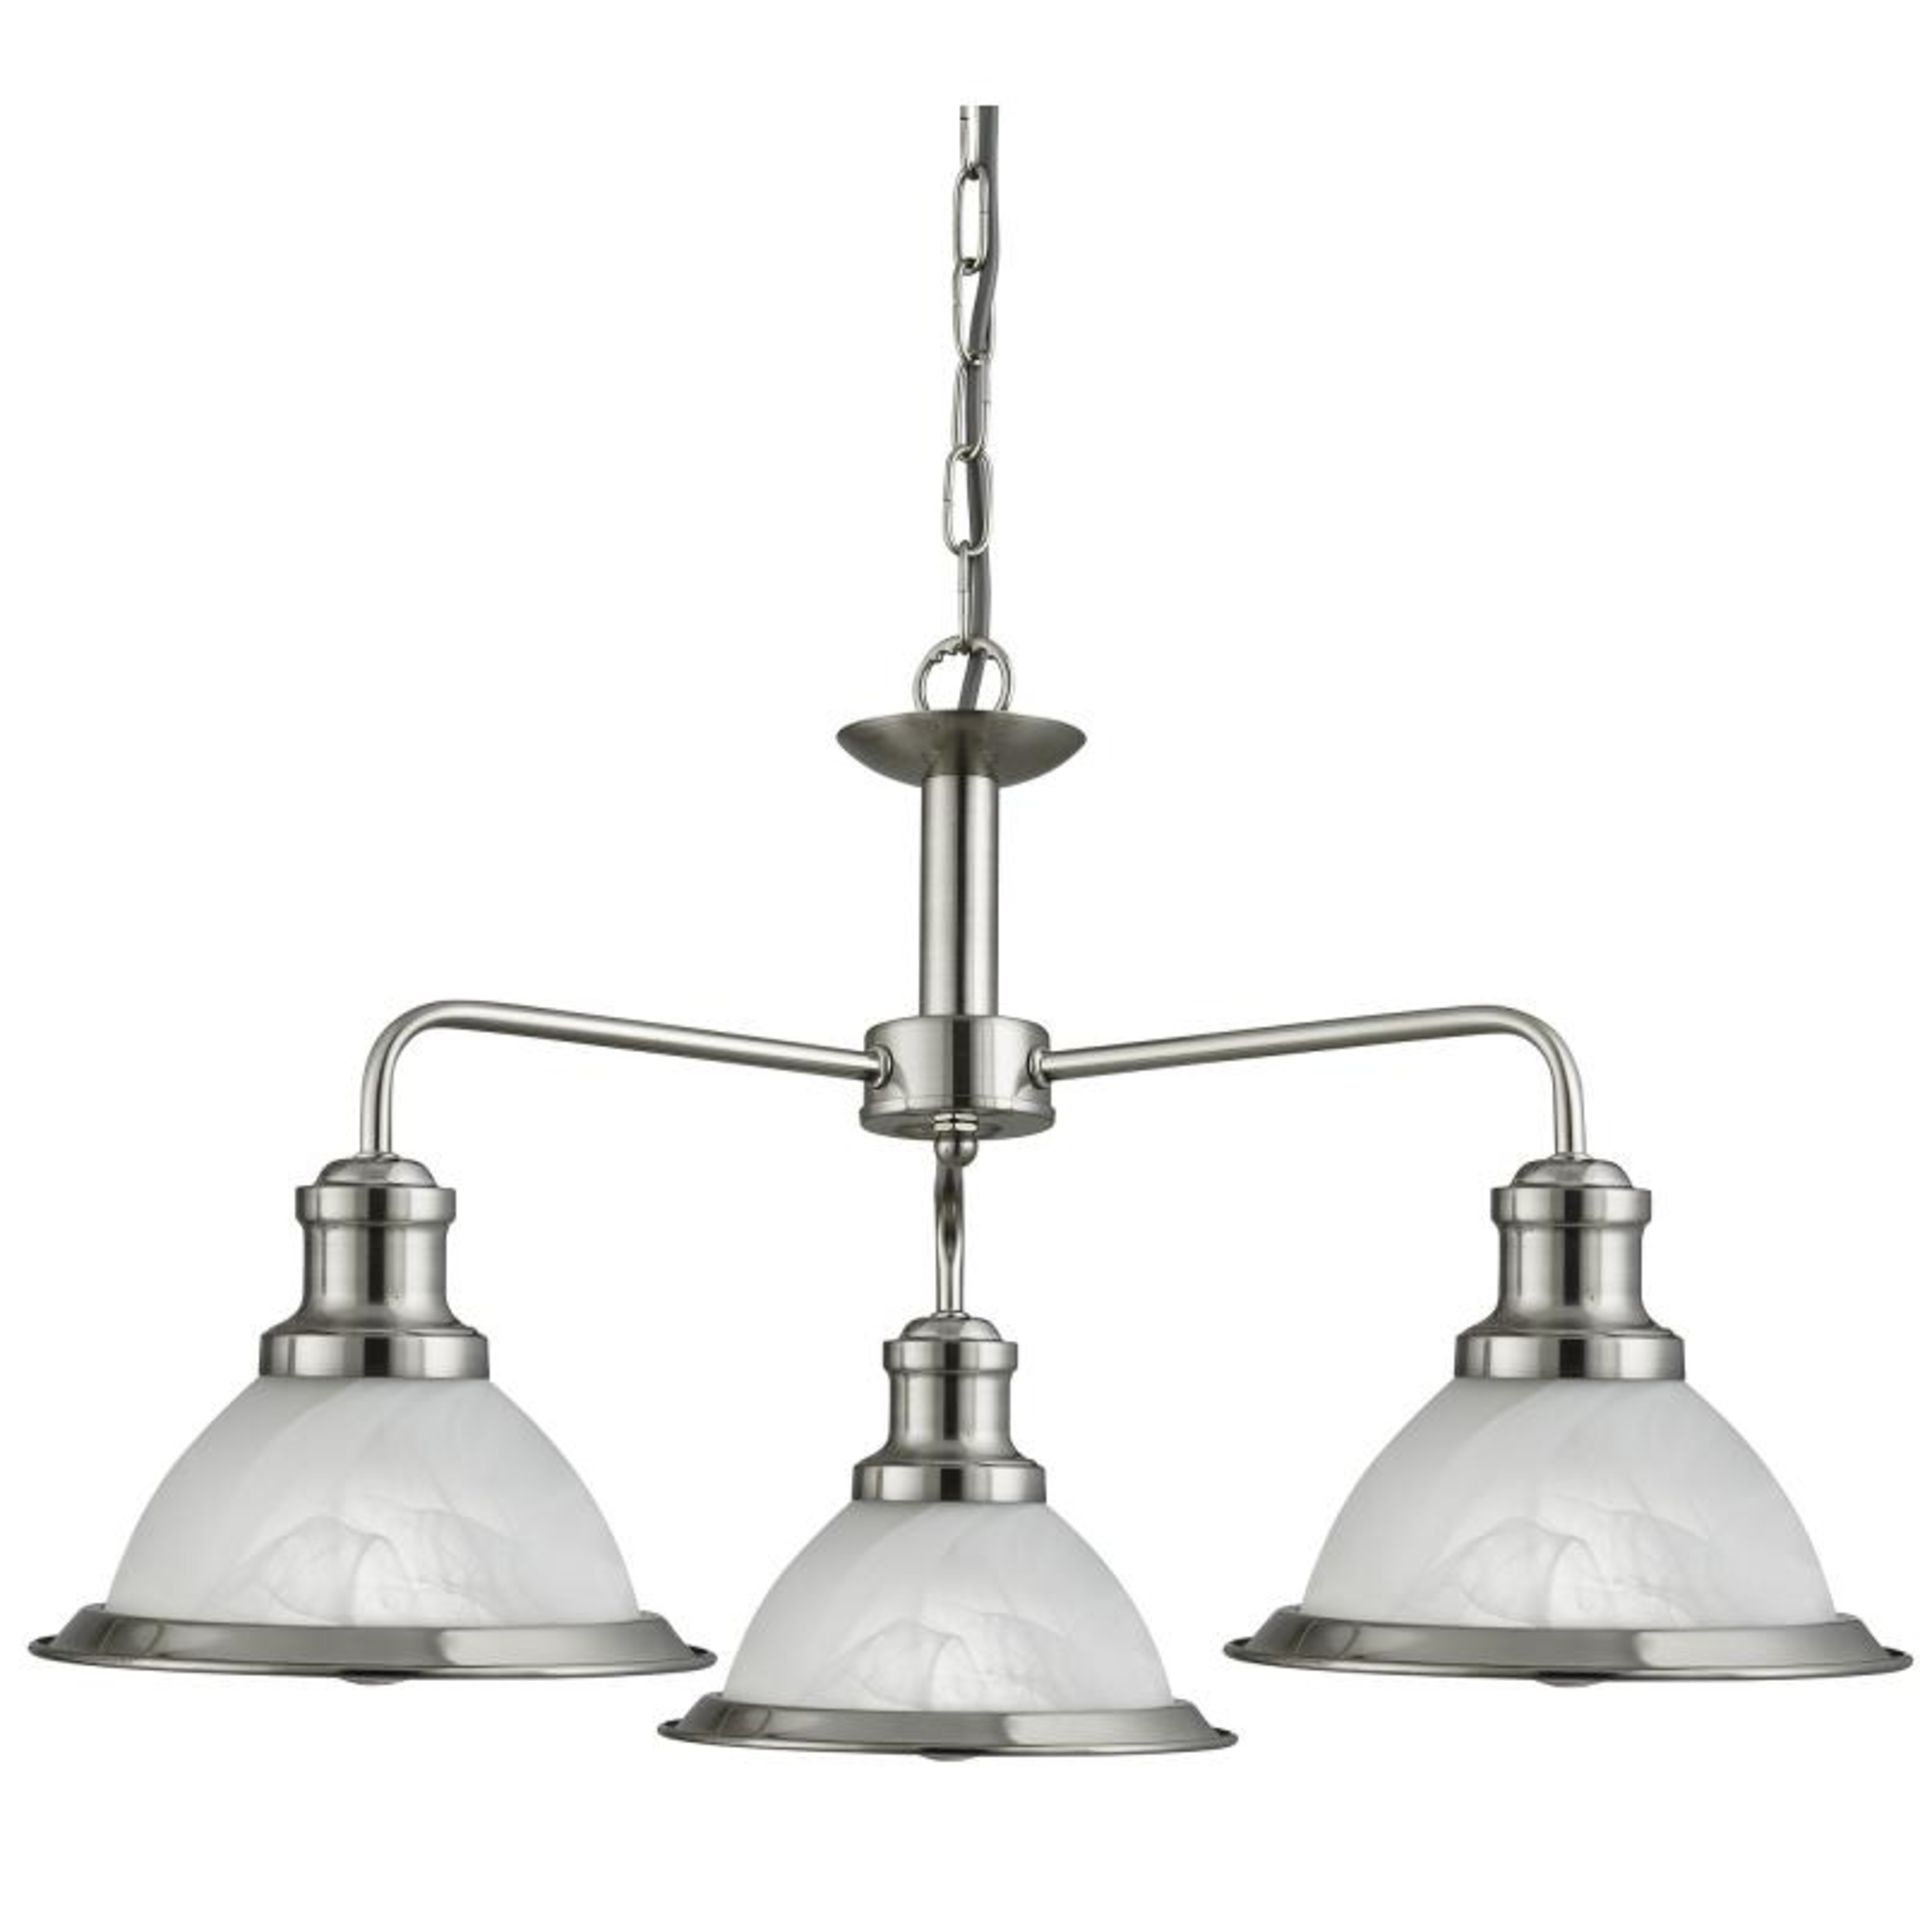 1 x Bistro Satin Silver 3 Light Ceiling Fitting With Marble Glass Shades - New Boxed Stock - CL323 -